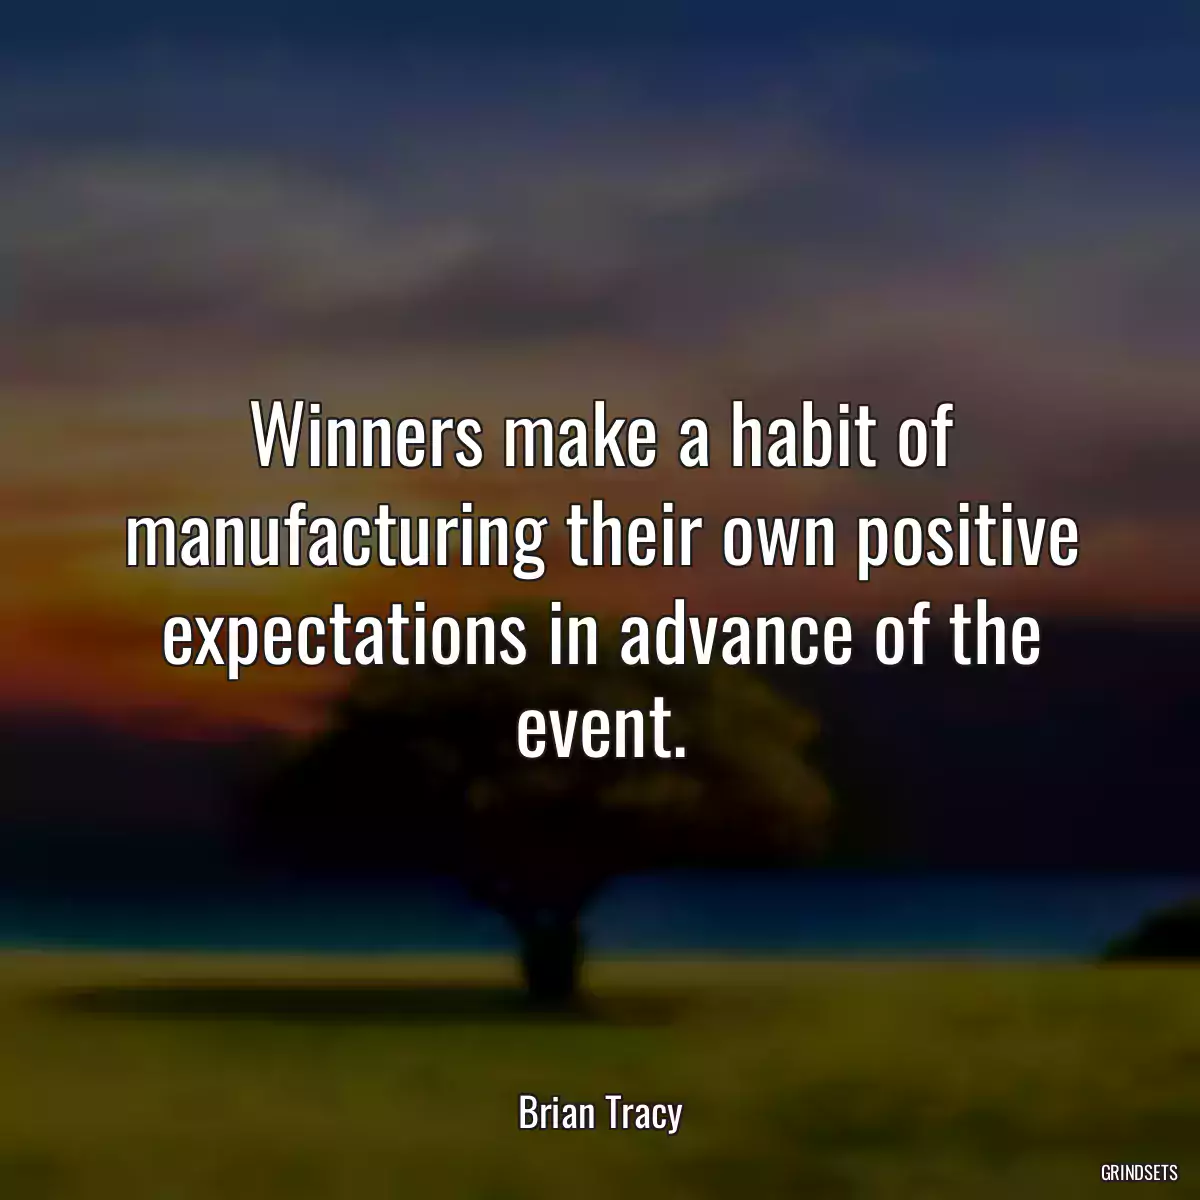 Winners make a habit of manufacturing their own positive expectations in advance of the event.